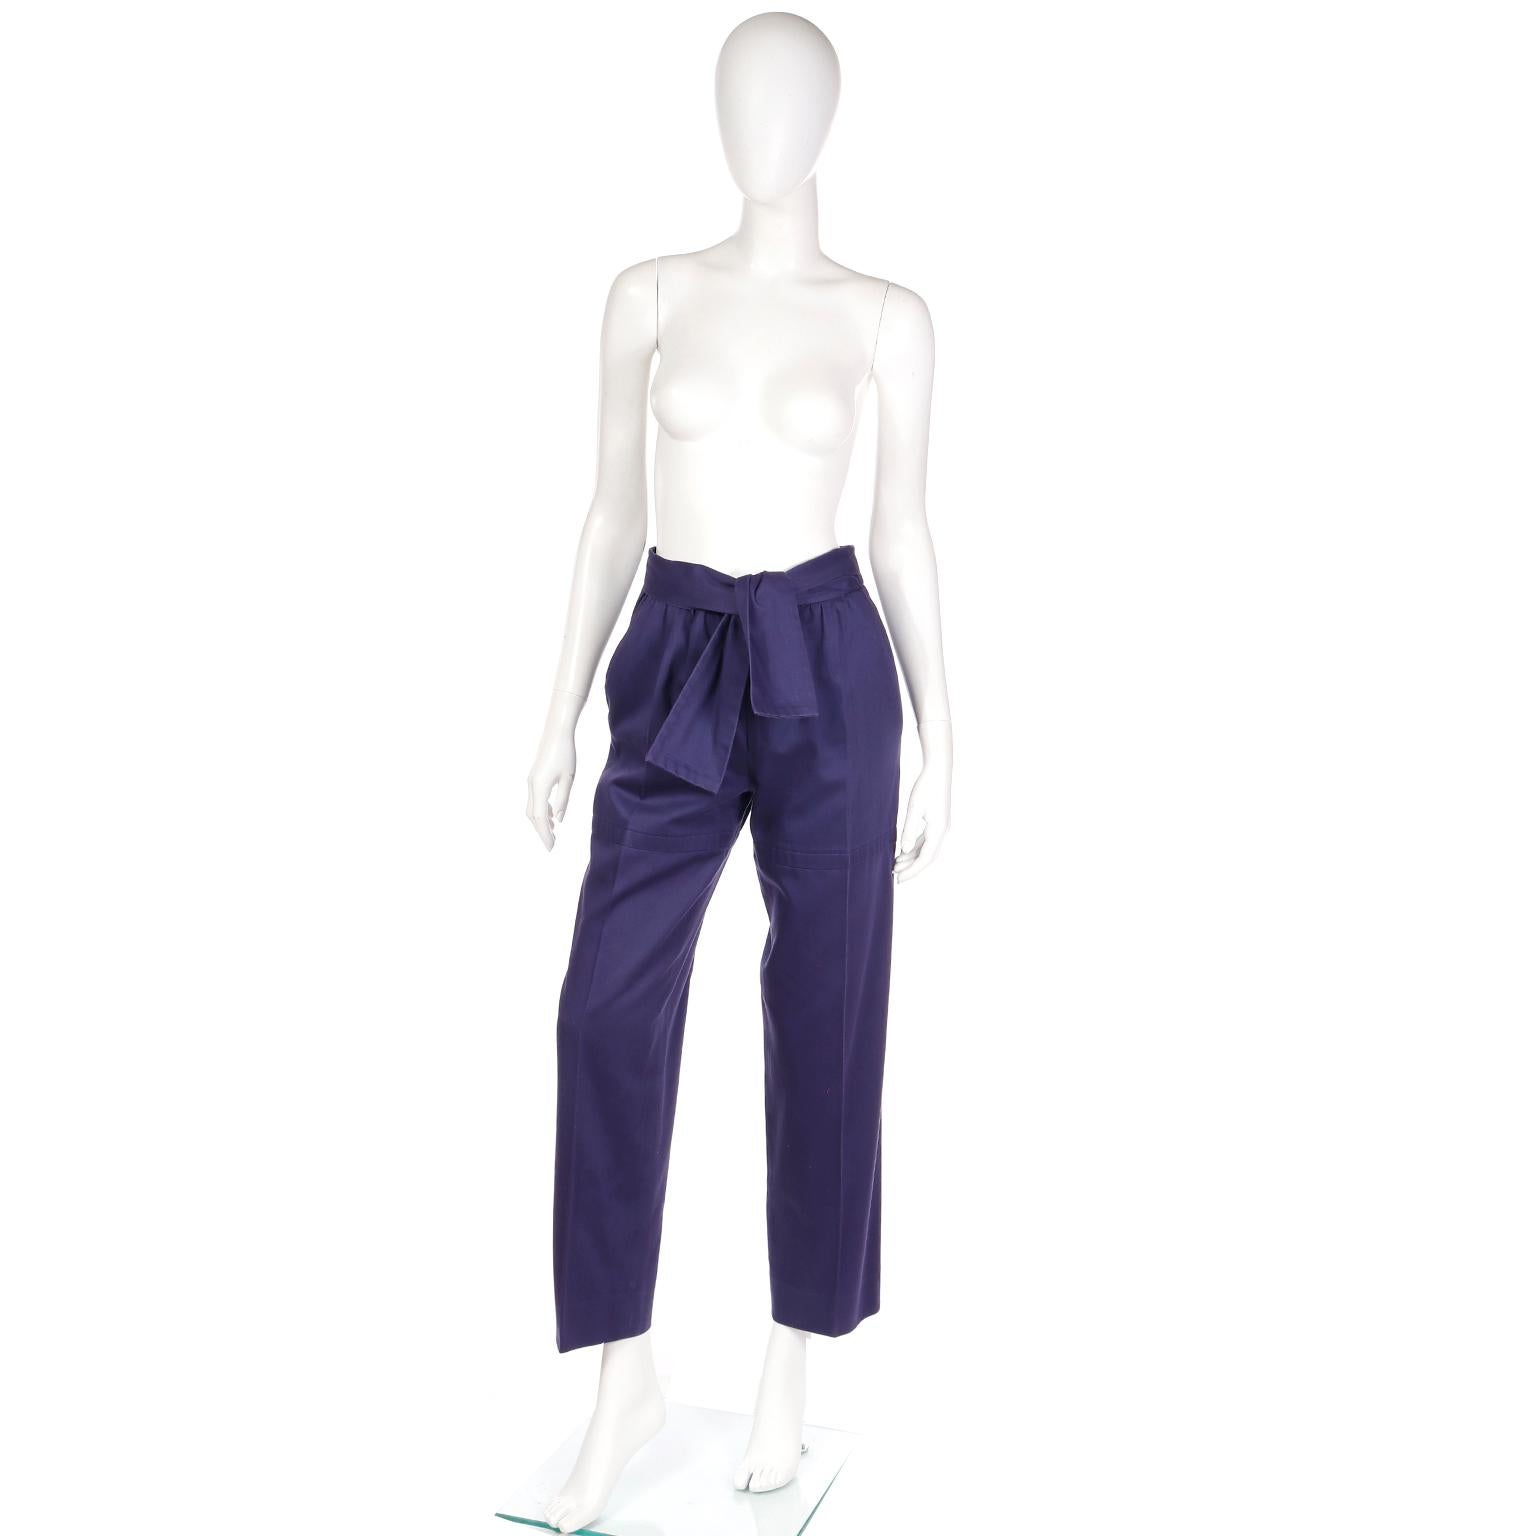 These vintage Yves Saint Laurent purple cotton trousers are anything but ordinary! The color is the perfect rich, jewel tone saturated purple and we fell in love the with attached sash belt that can be tied in numerous ways.
These pants have a